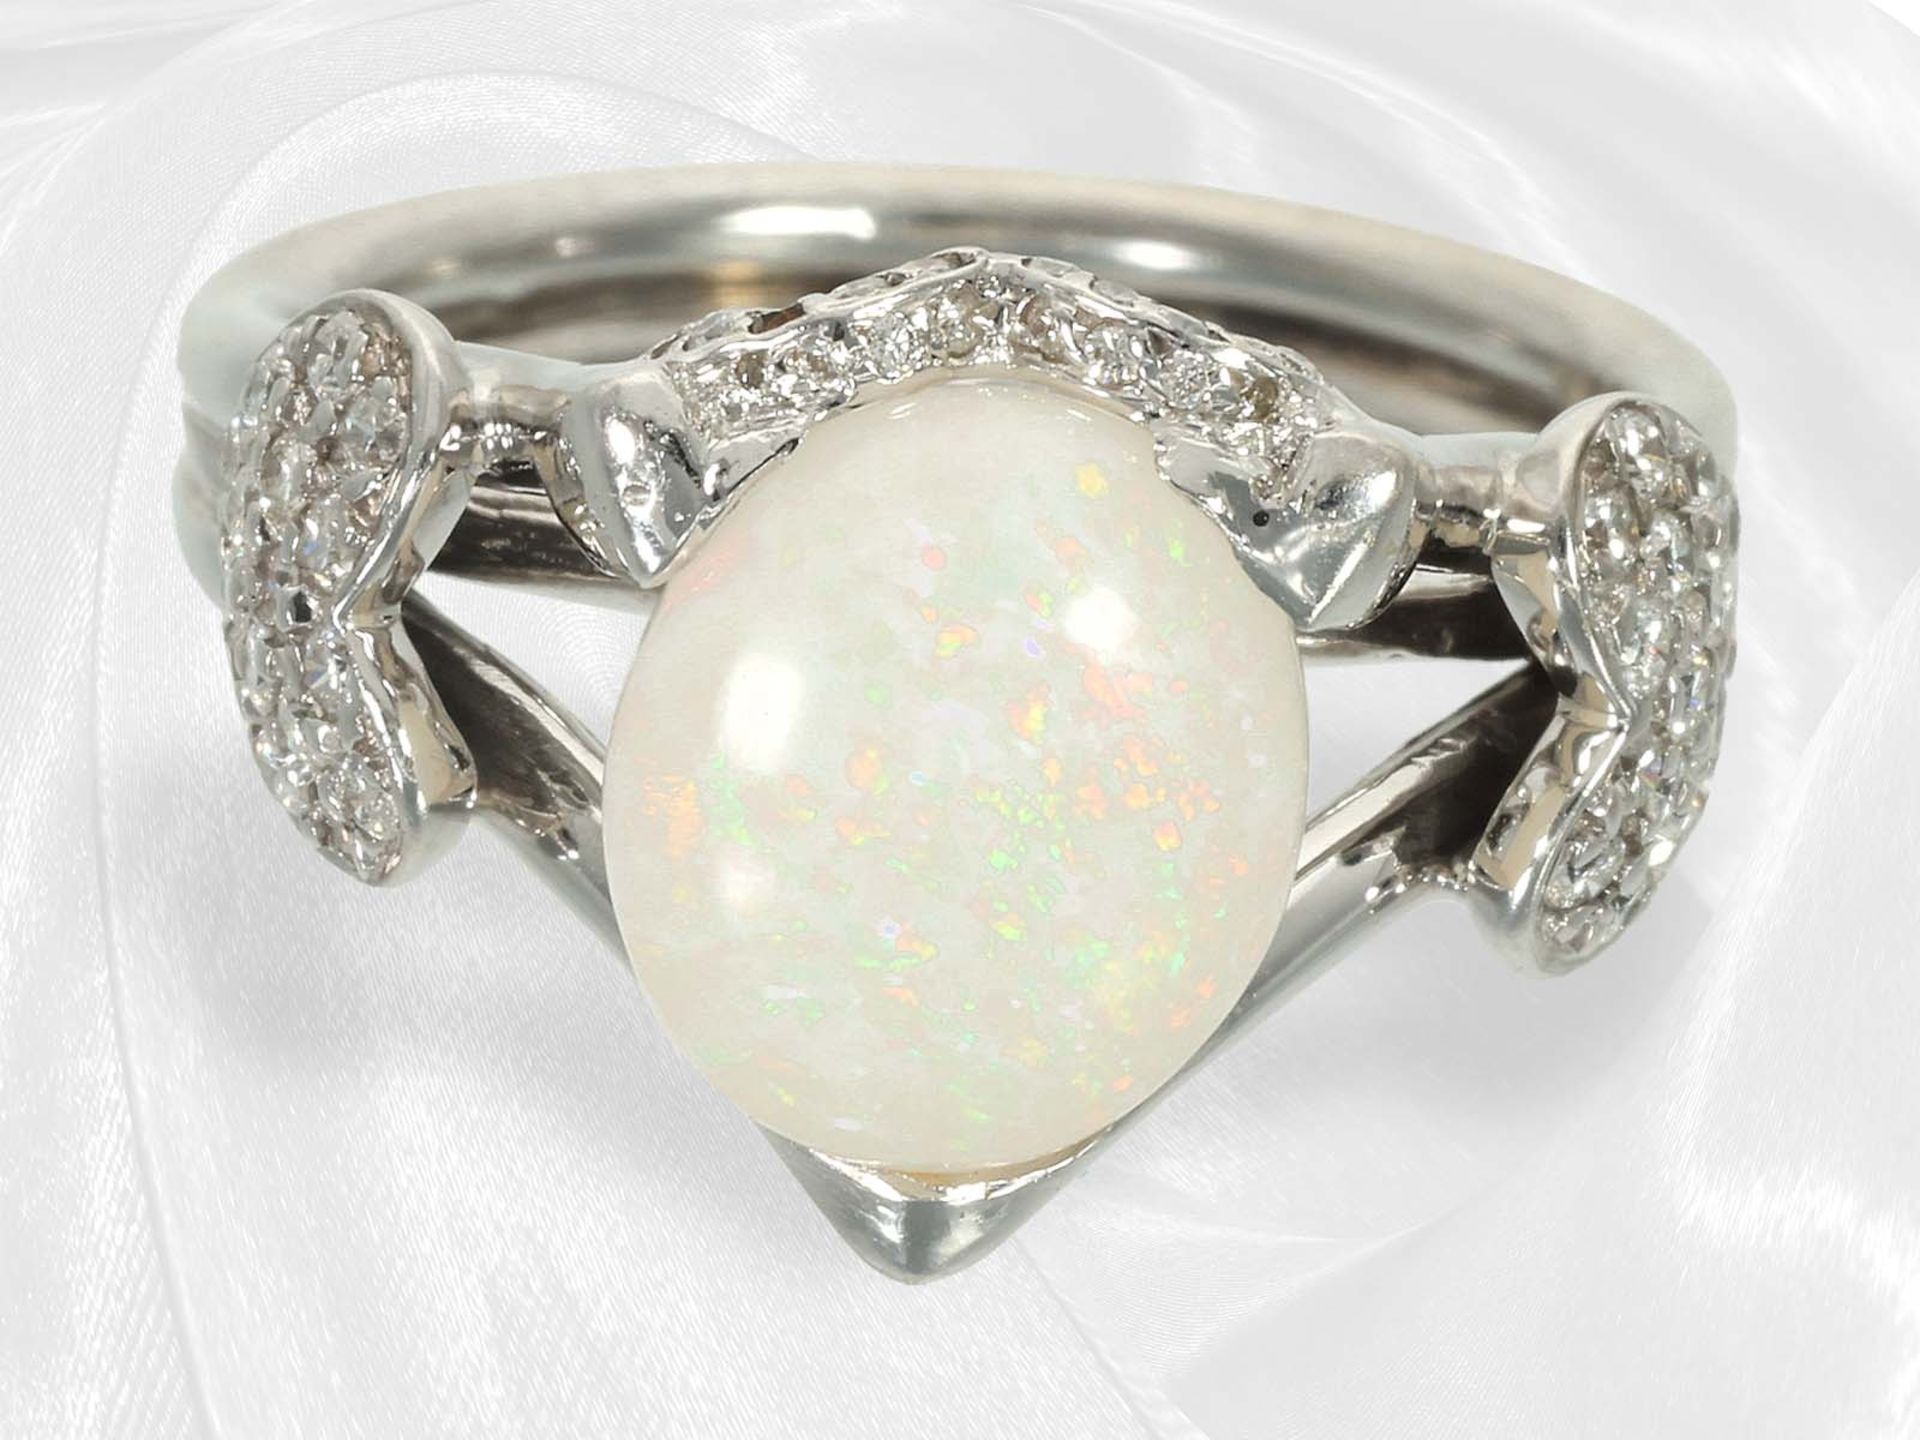 Fancy designer goldsmith ring with opal and brilliant-cut diamonds, "Hearts", 18K white gold, handma - Image 5 of 5